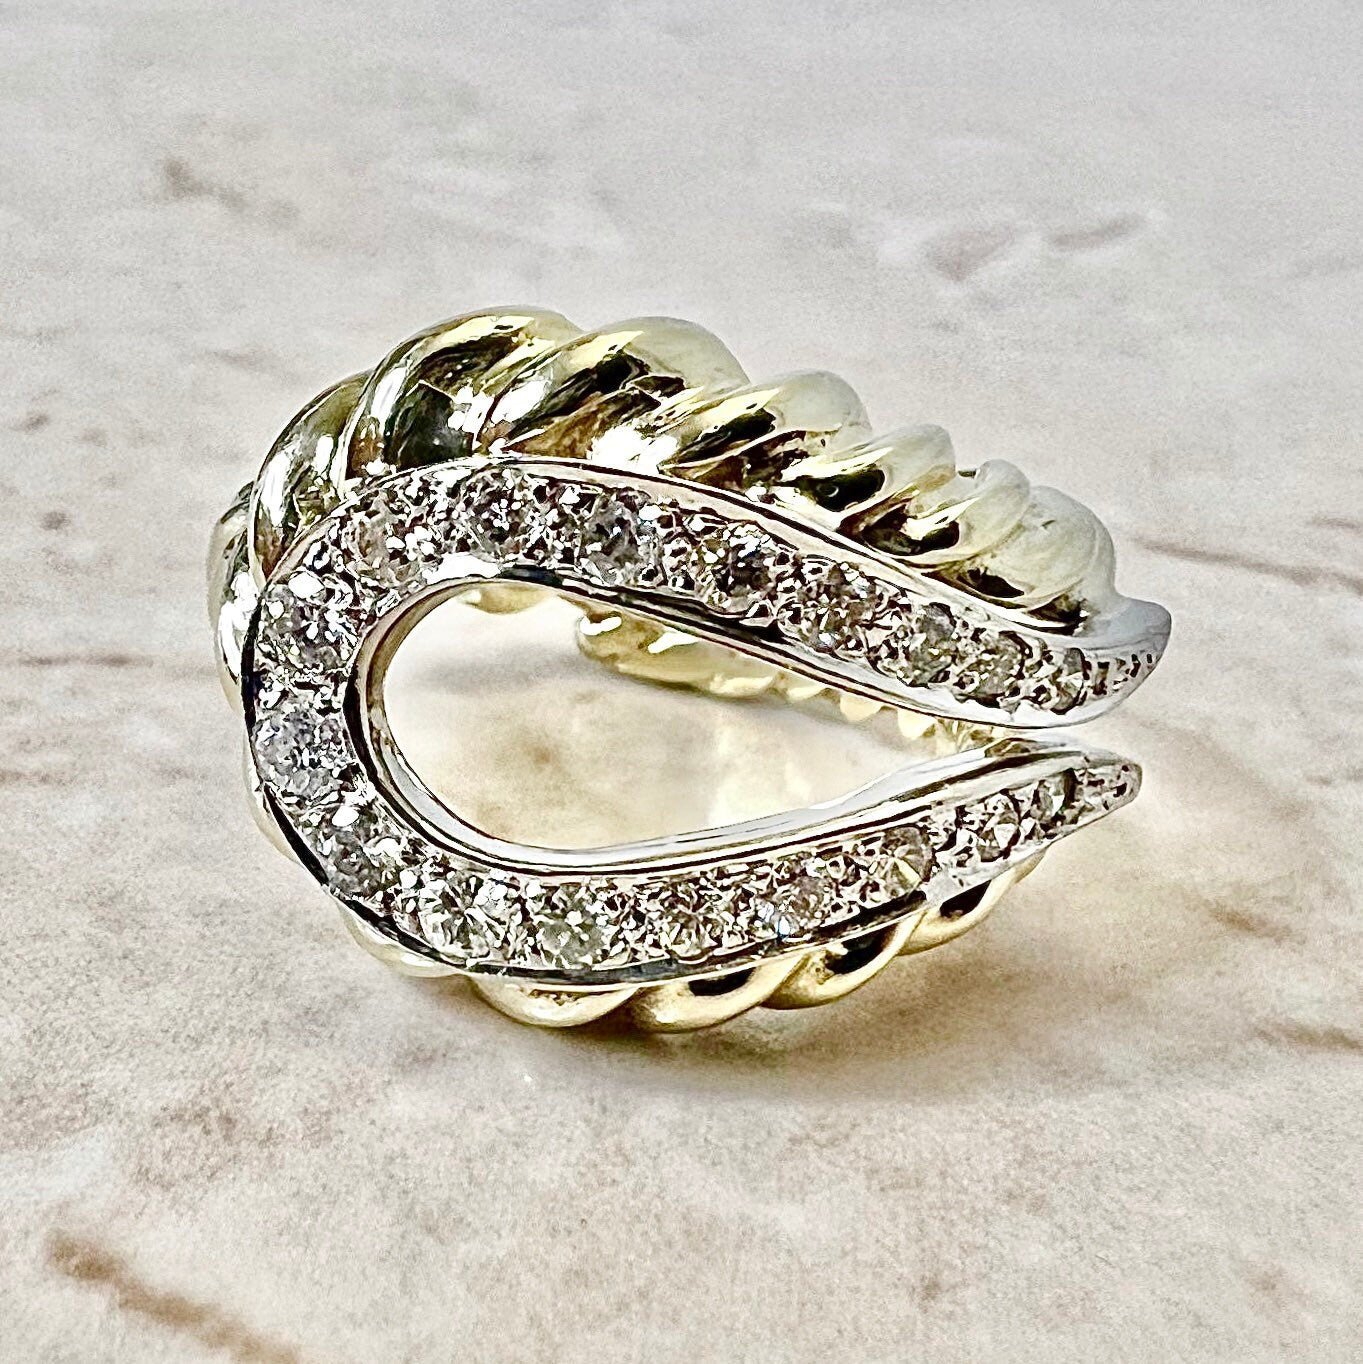 Fine Vintage 14K Rope Diamond Ring - Two Tone Gold Diamond Cocktail Ring - Anniversary Ring - Birthday Gift - Holiday Gift